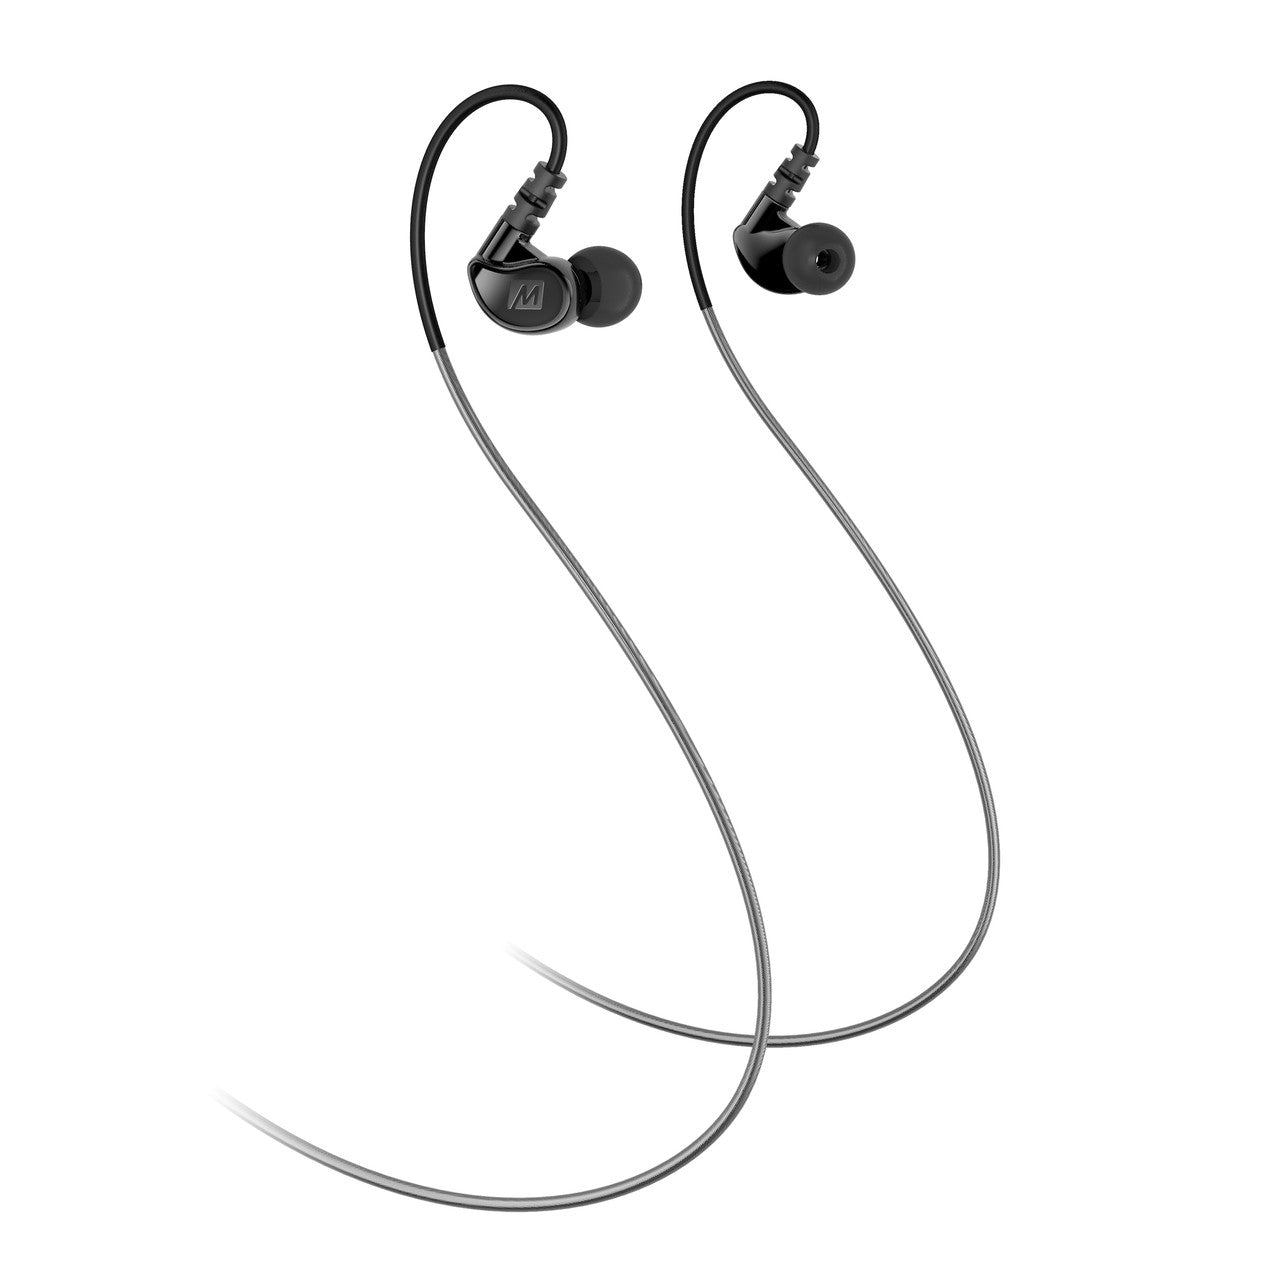 M6 In-Ear Sports Headphones with Memory Wire (3.5mm Plug)